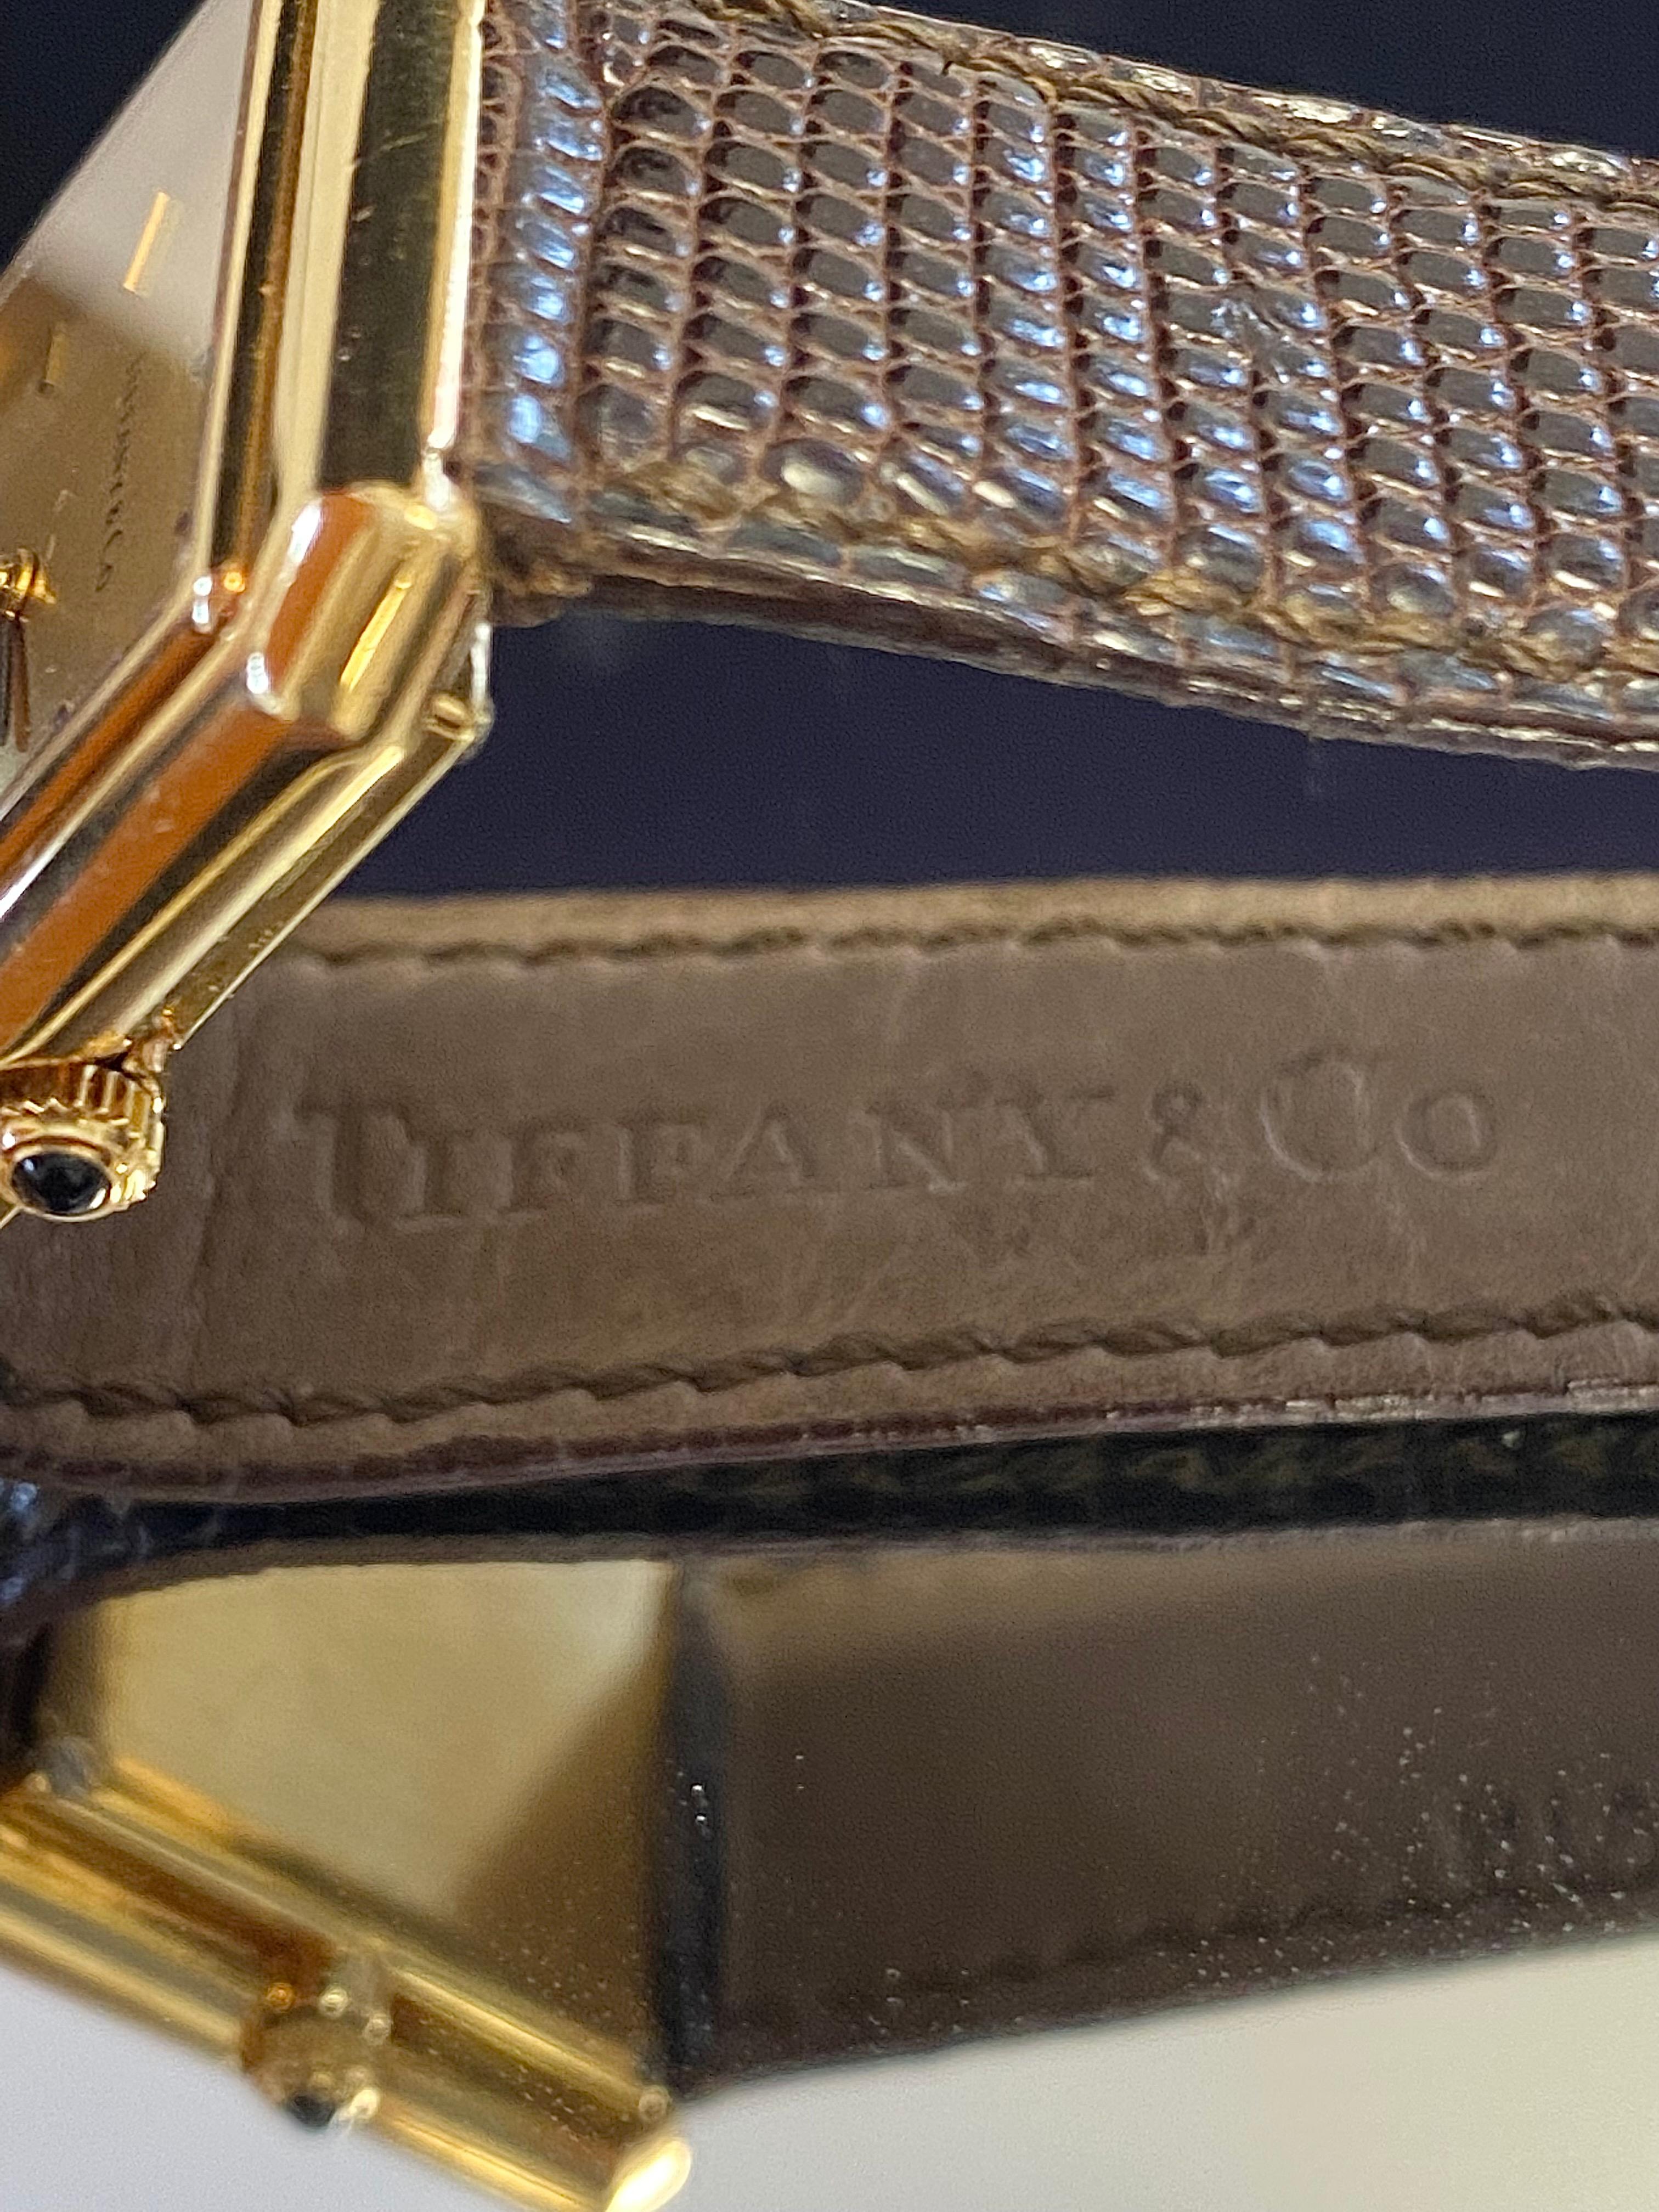 Unisex Tiffany & Co. Rectangular 18k Gold Watch with Original Leather Strap In Good Condition For Sale In Miami, FL